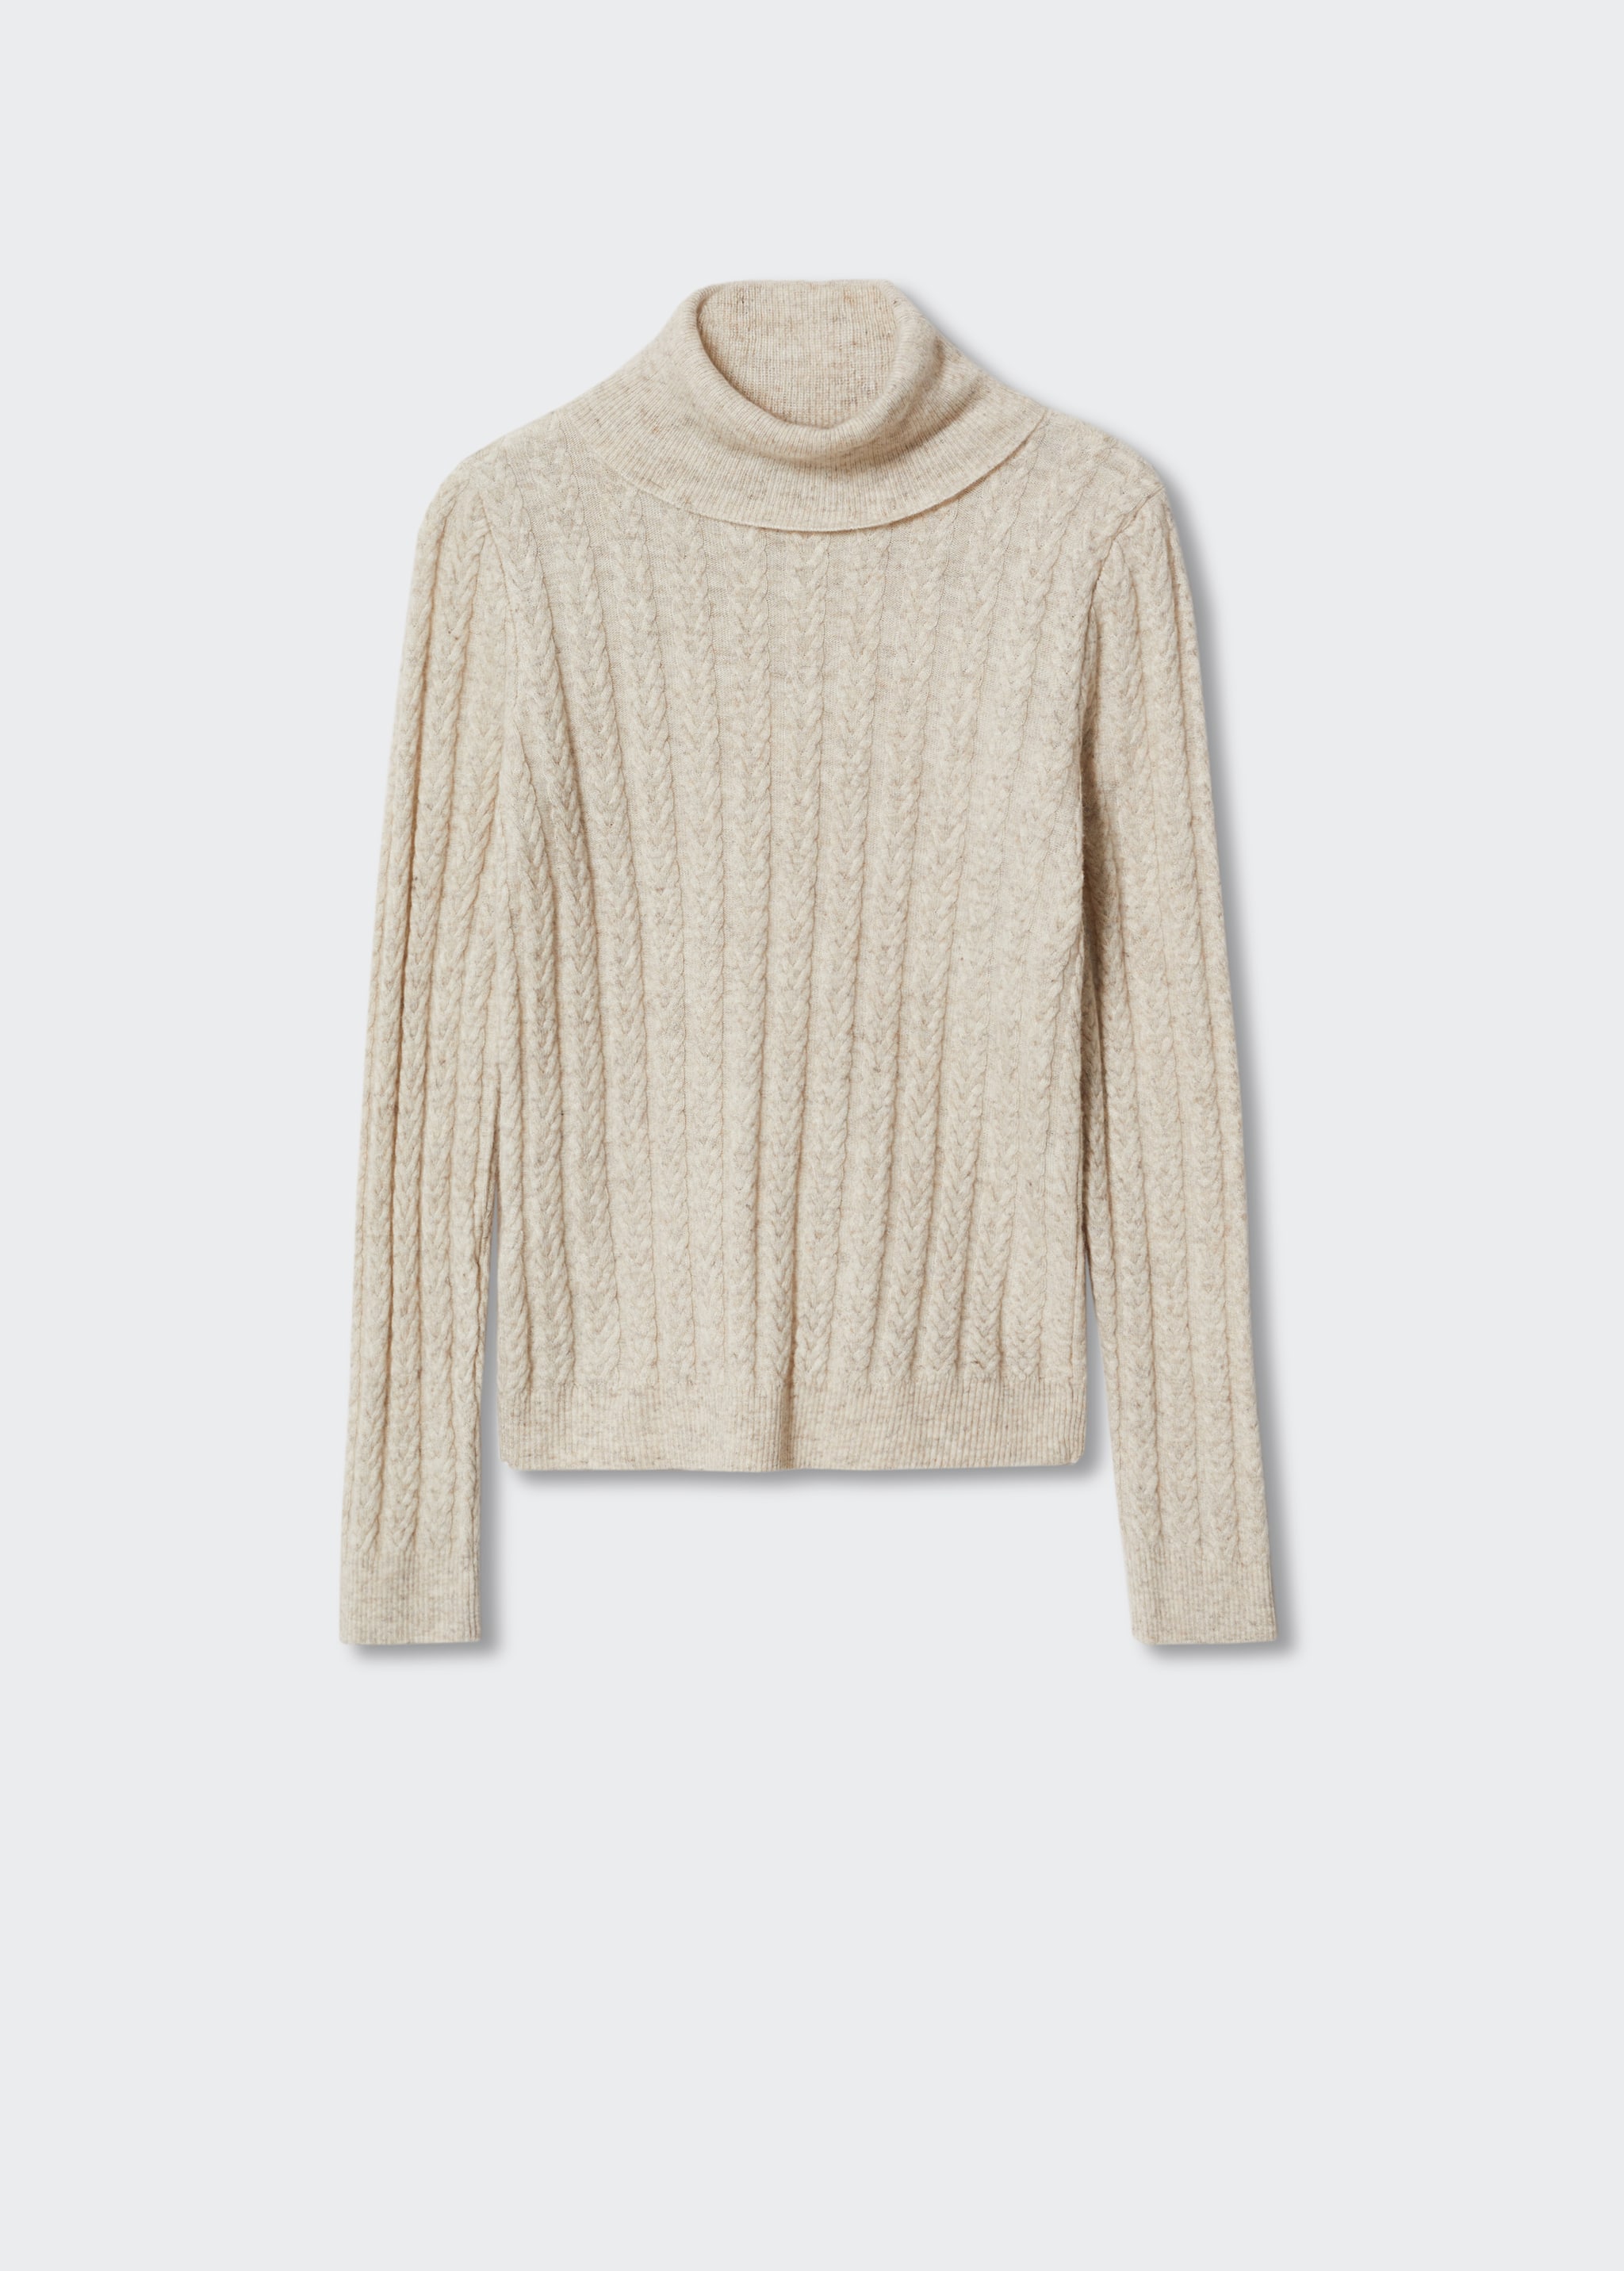 Cashmere wool sweater - Article without model